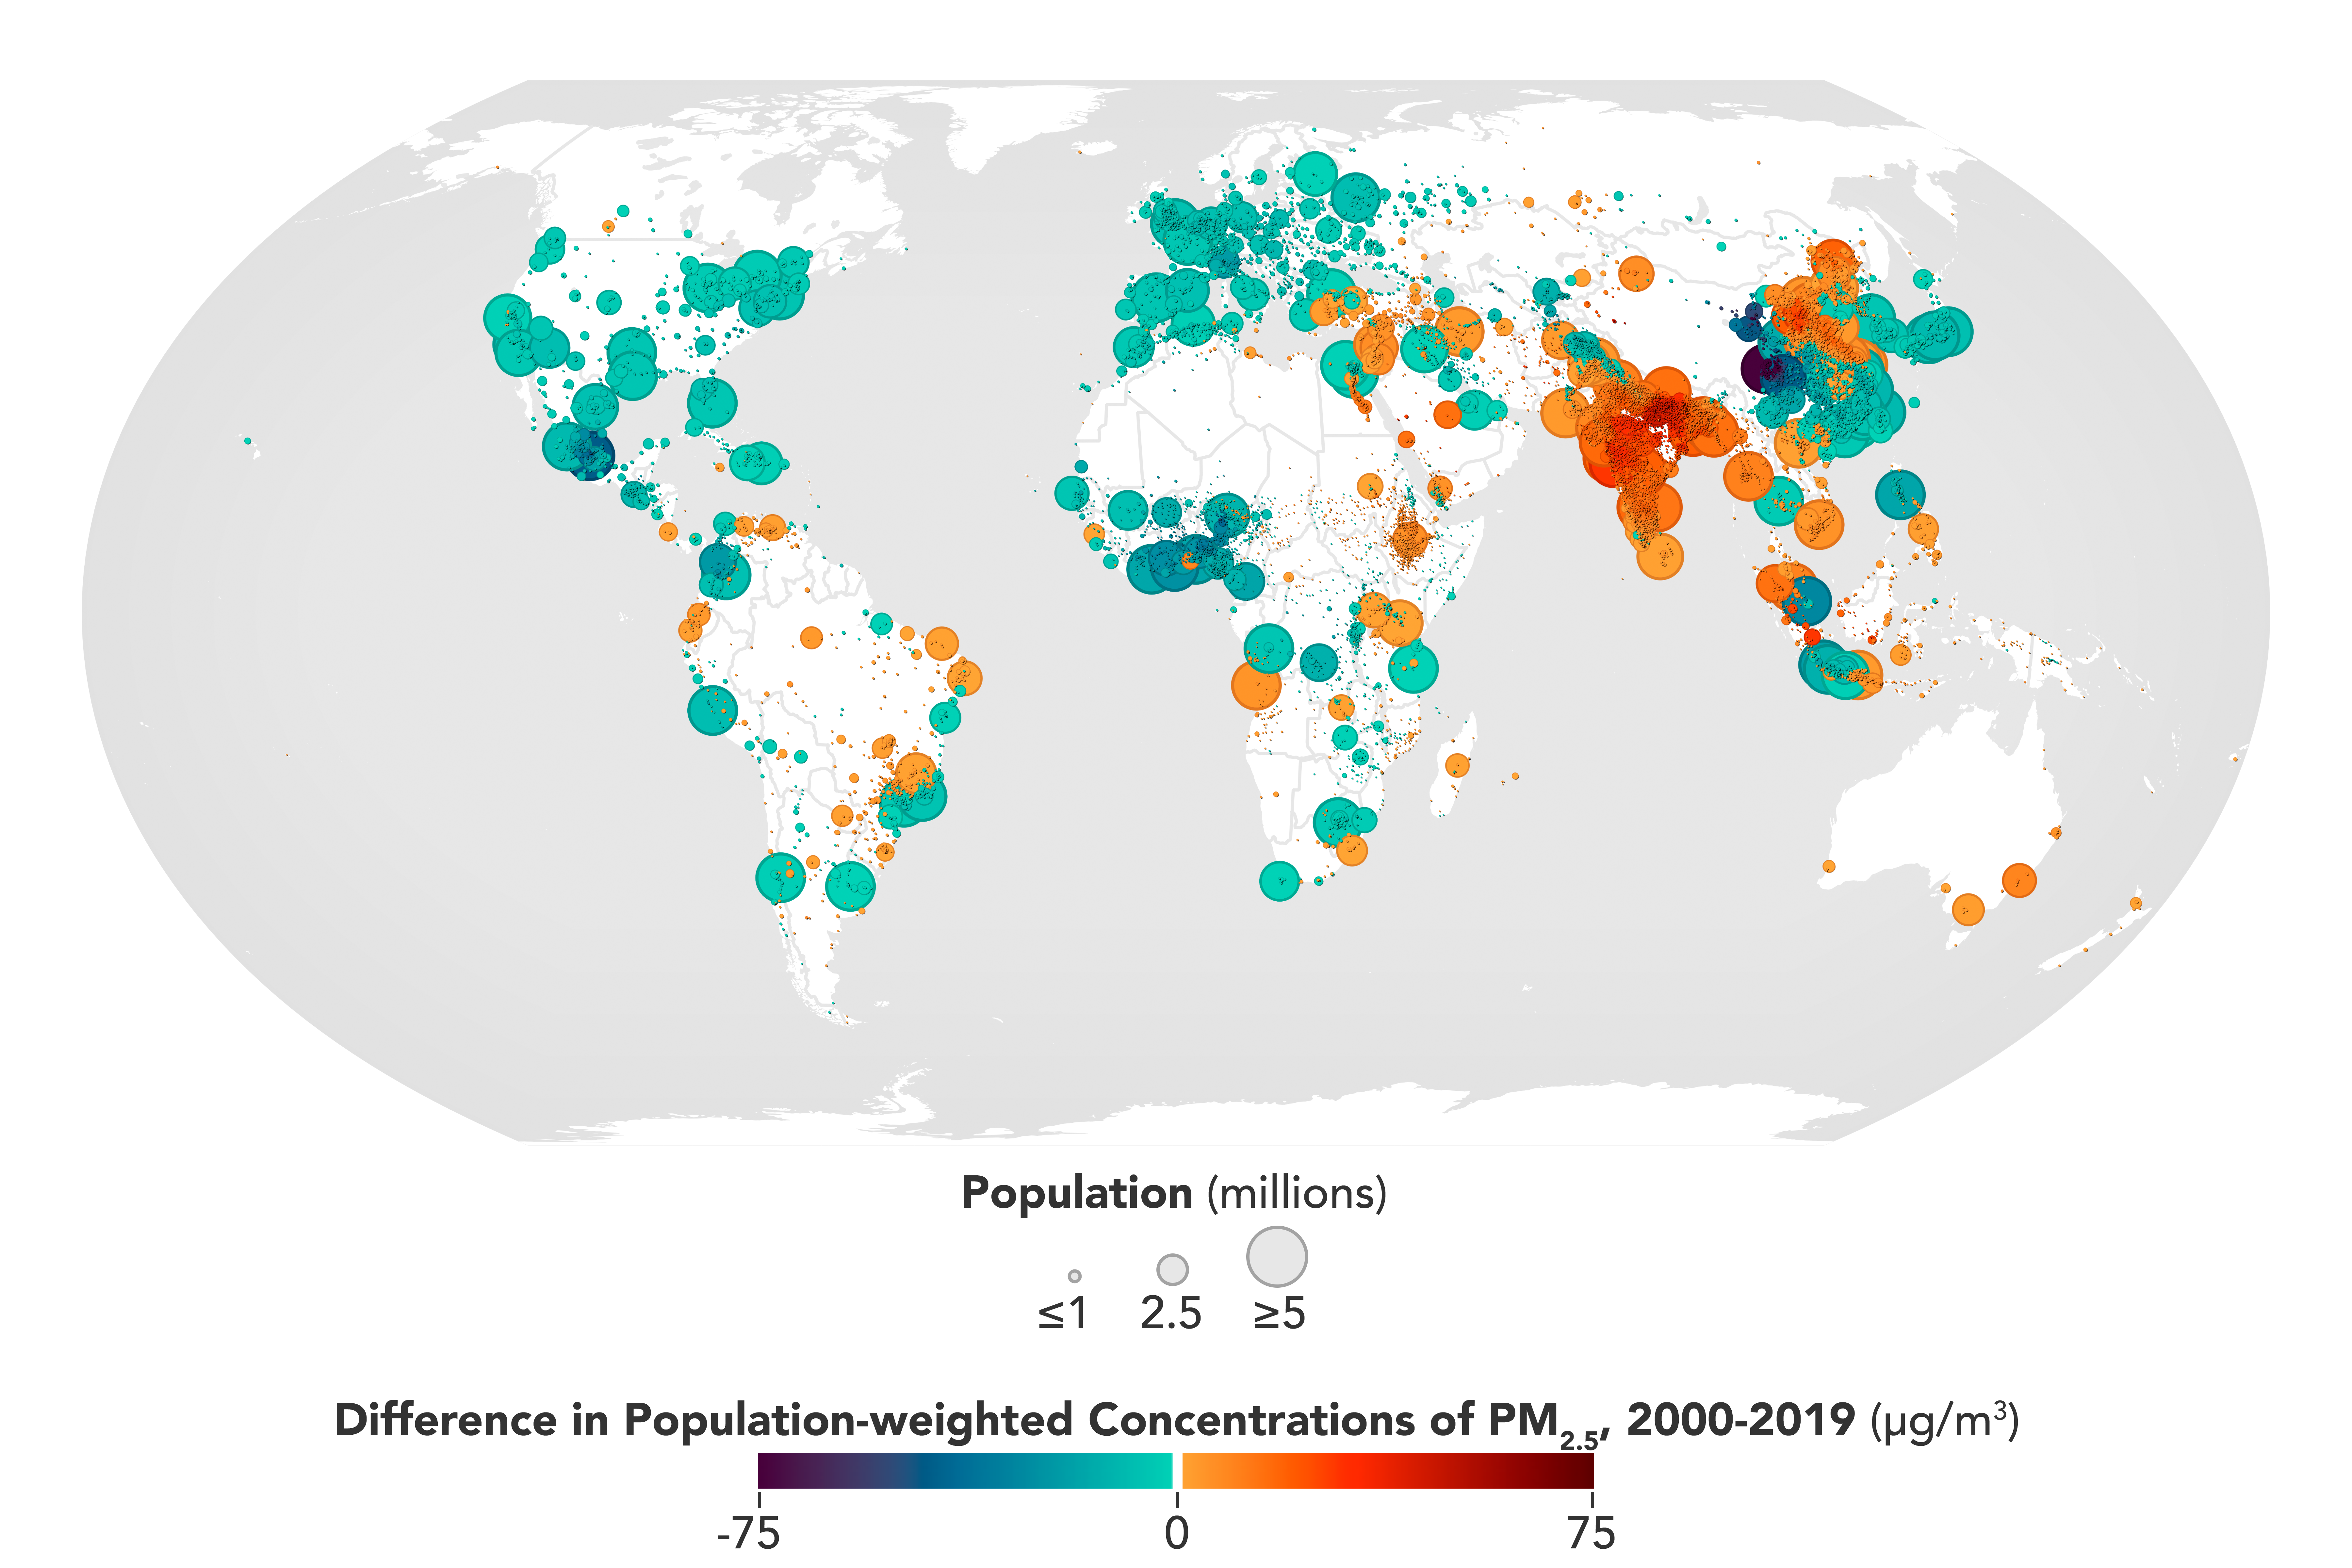 The map above shows the absolute change in PM2.5 concentrations weighted by population around the world between 2000 and 2019 (Pratt, 2022). 